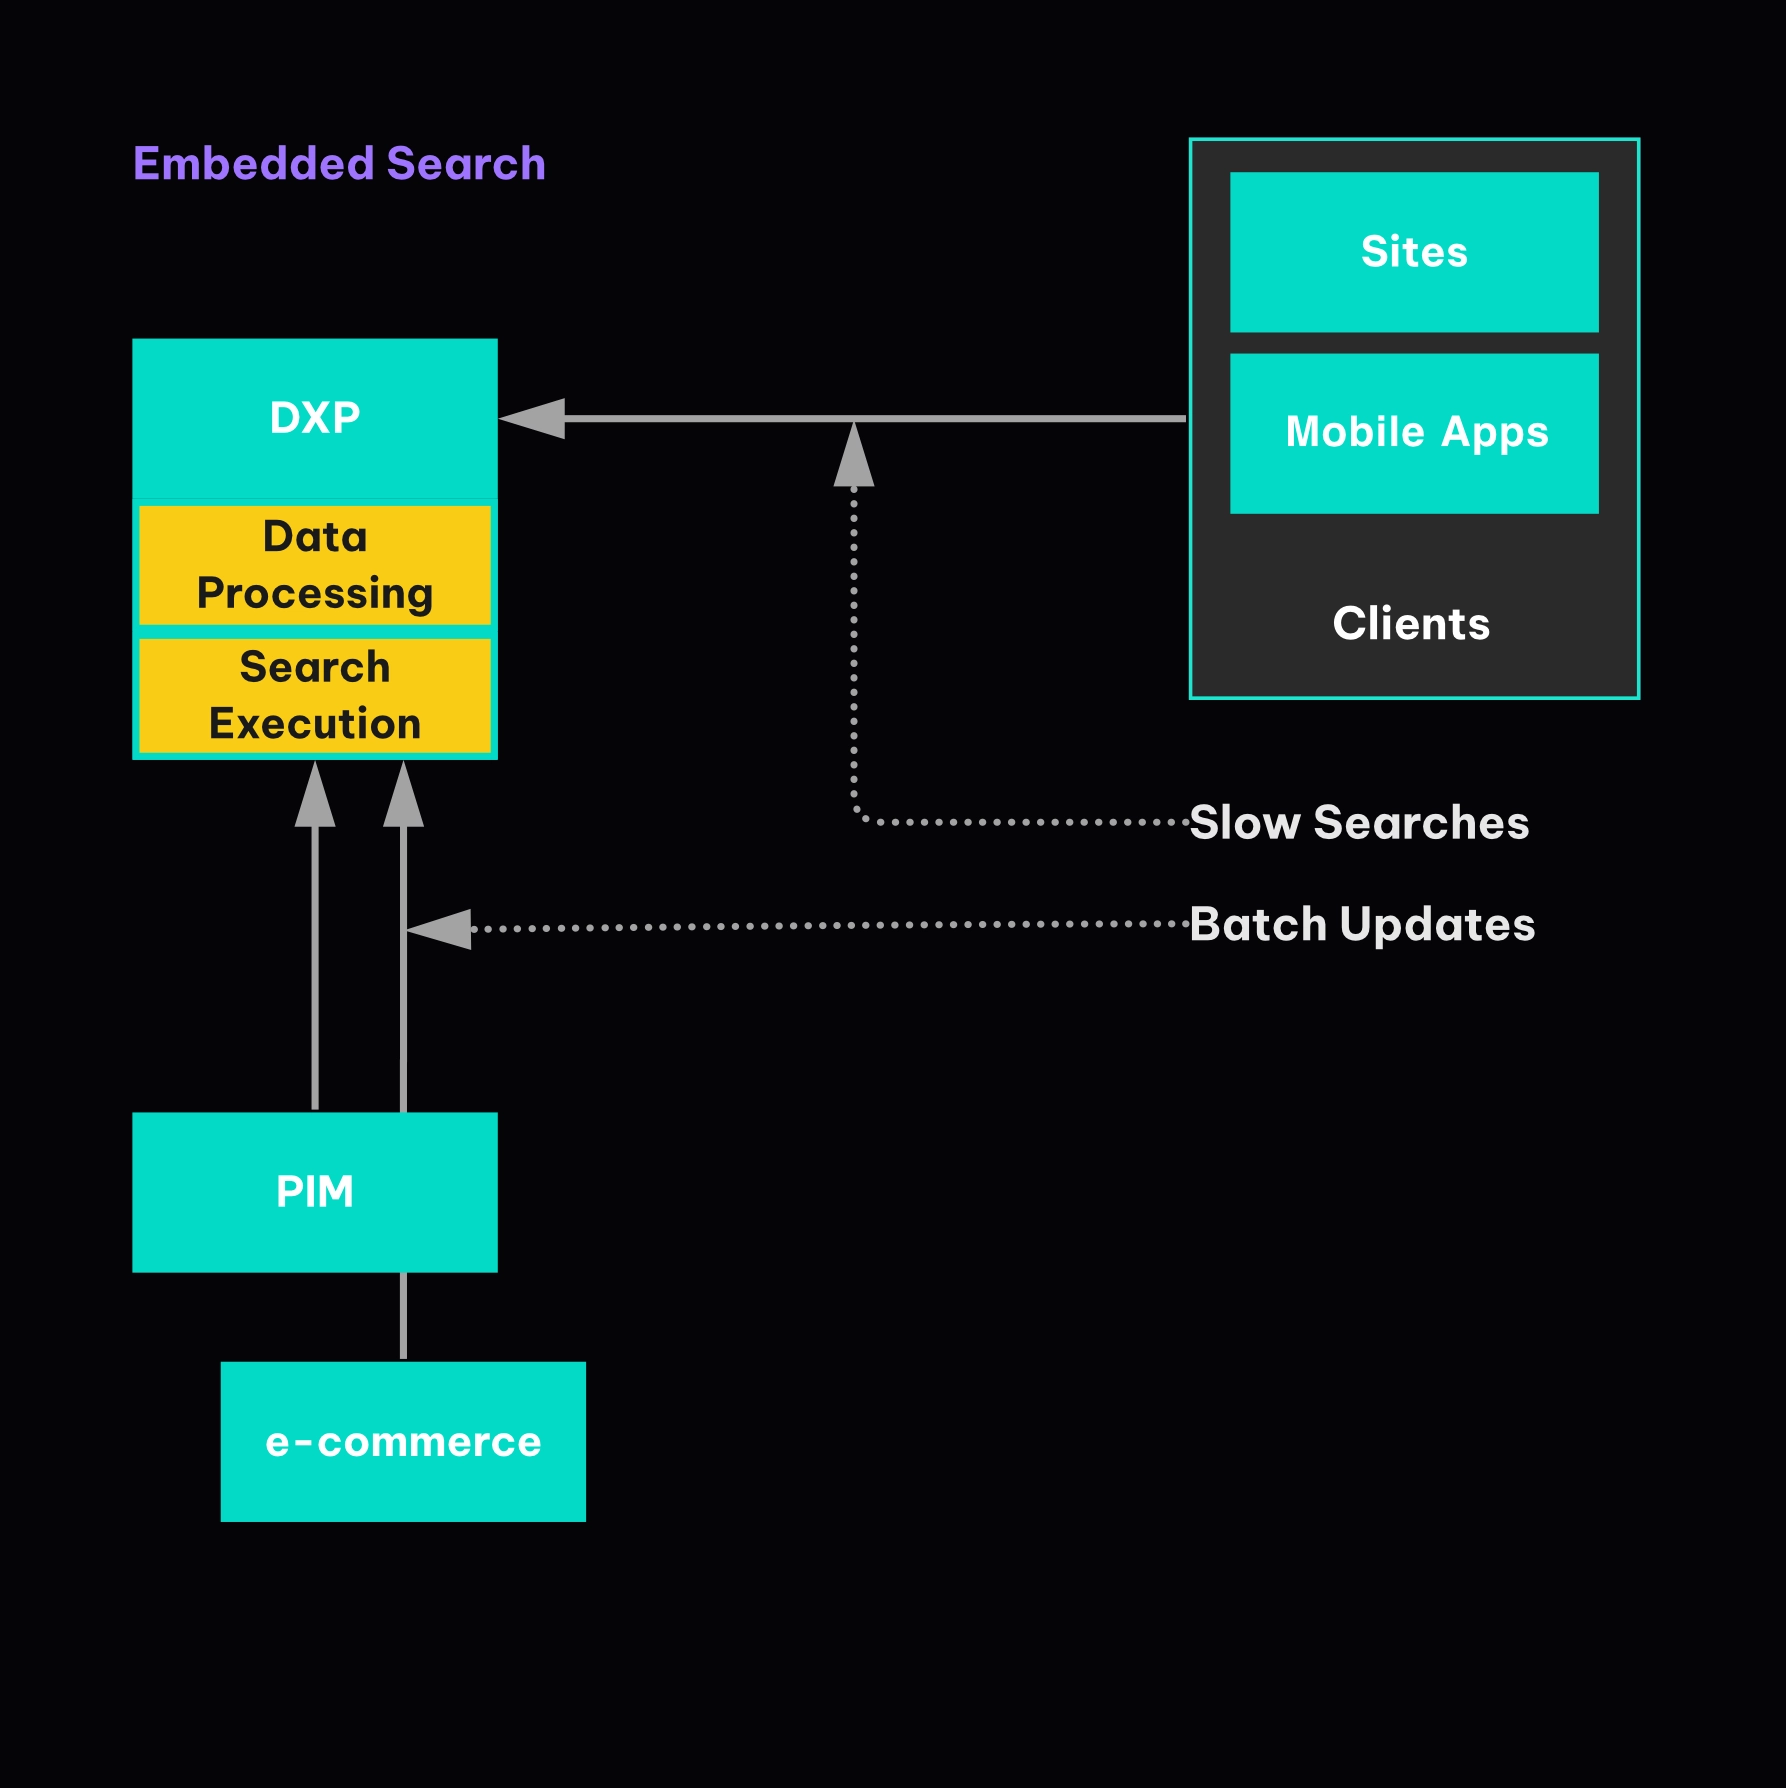 Diagram explaining how the embedded search works